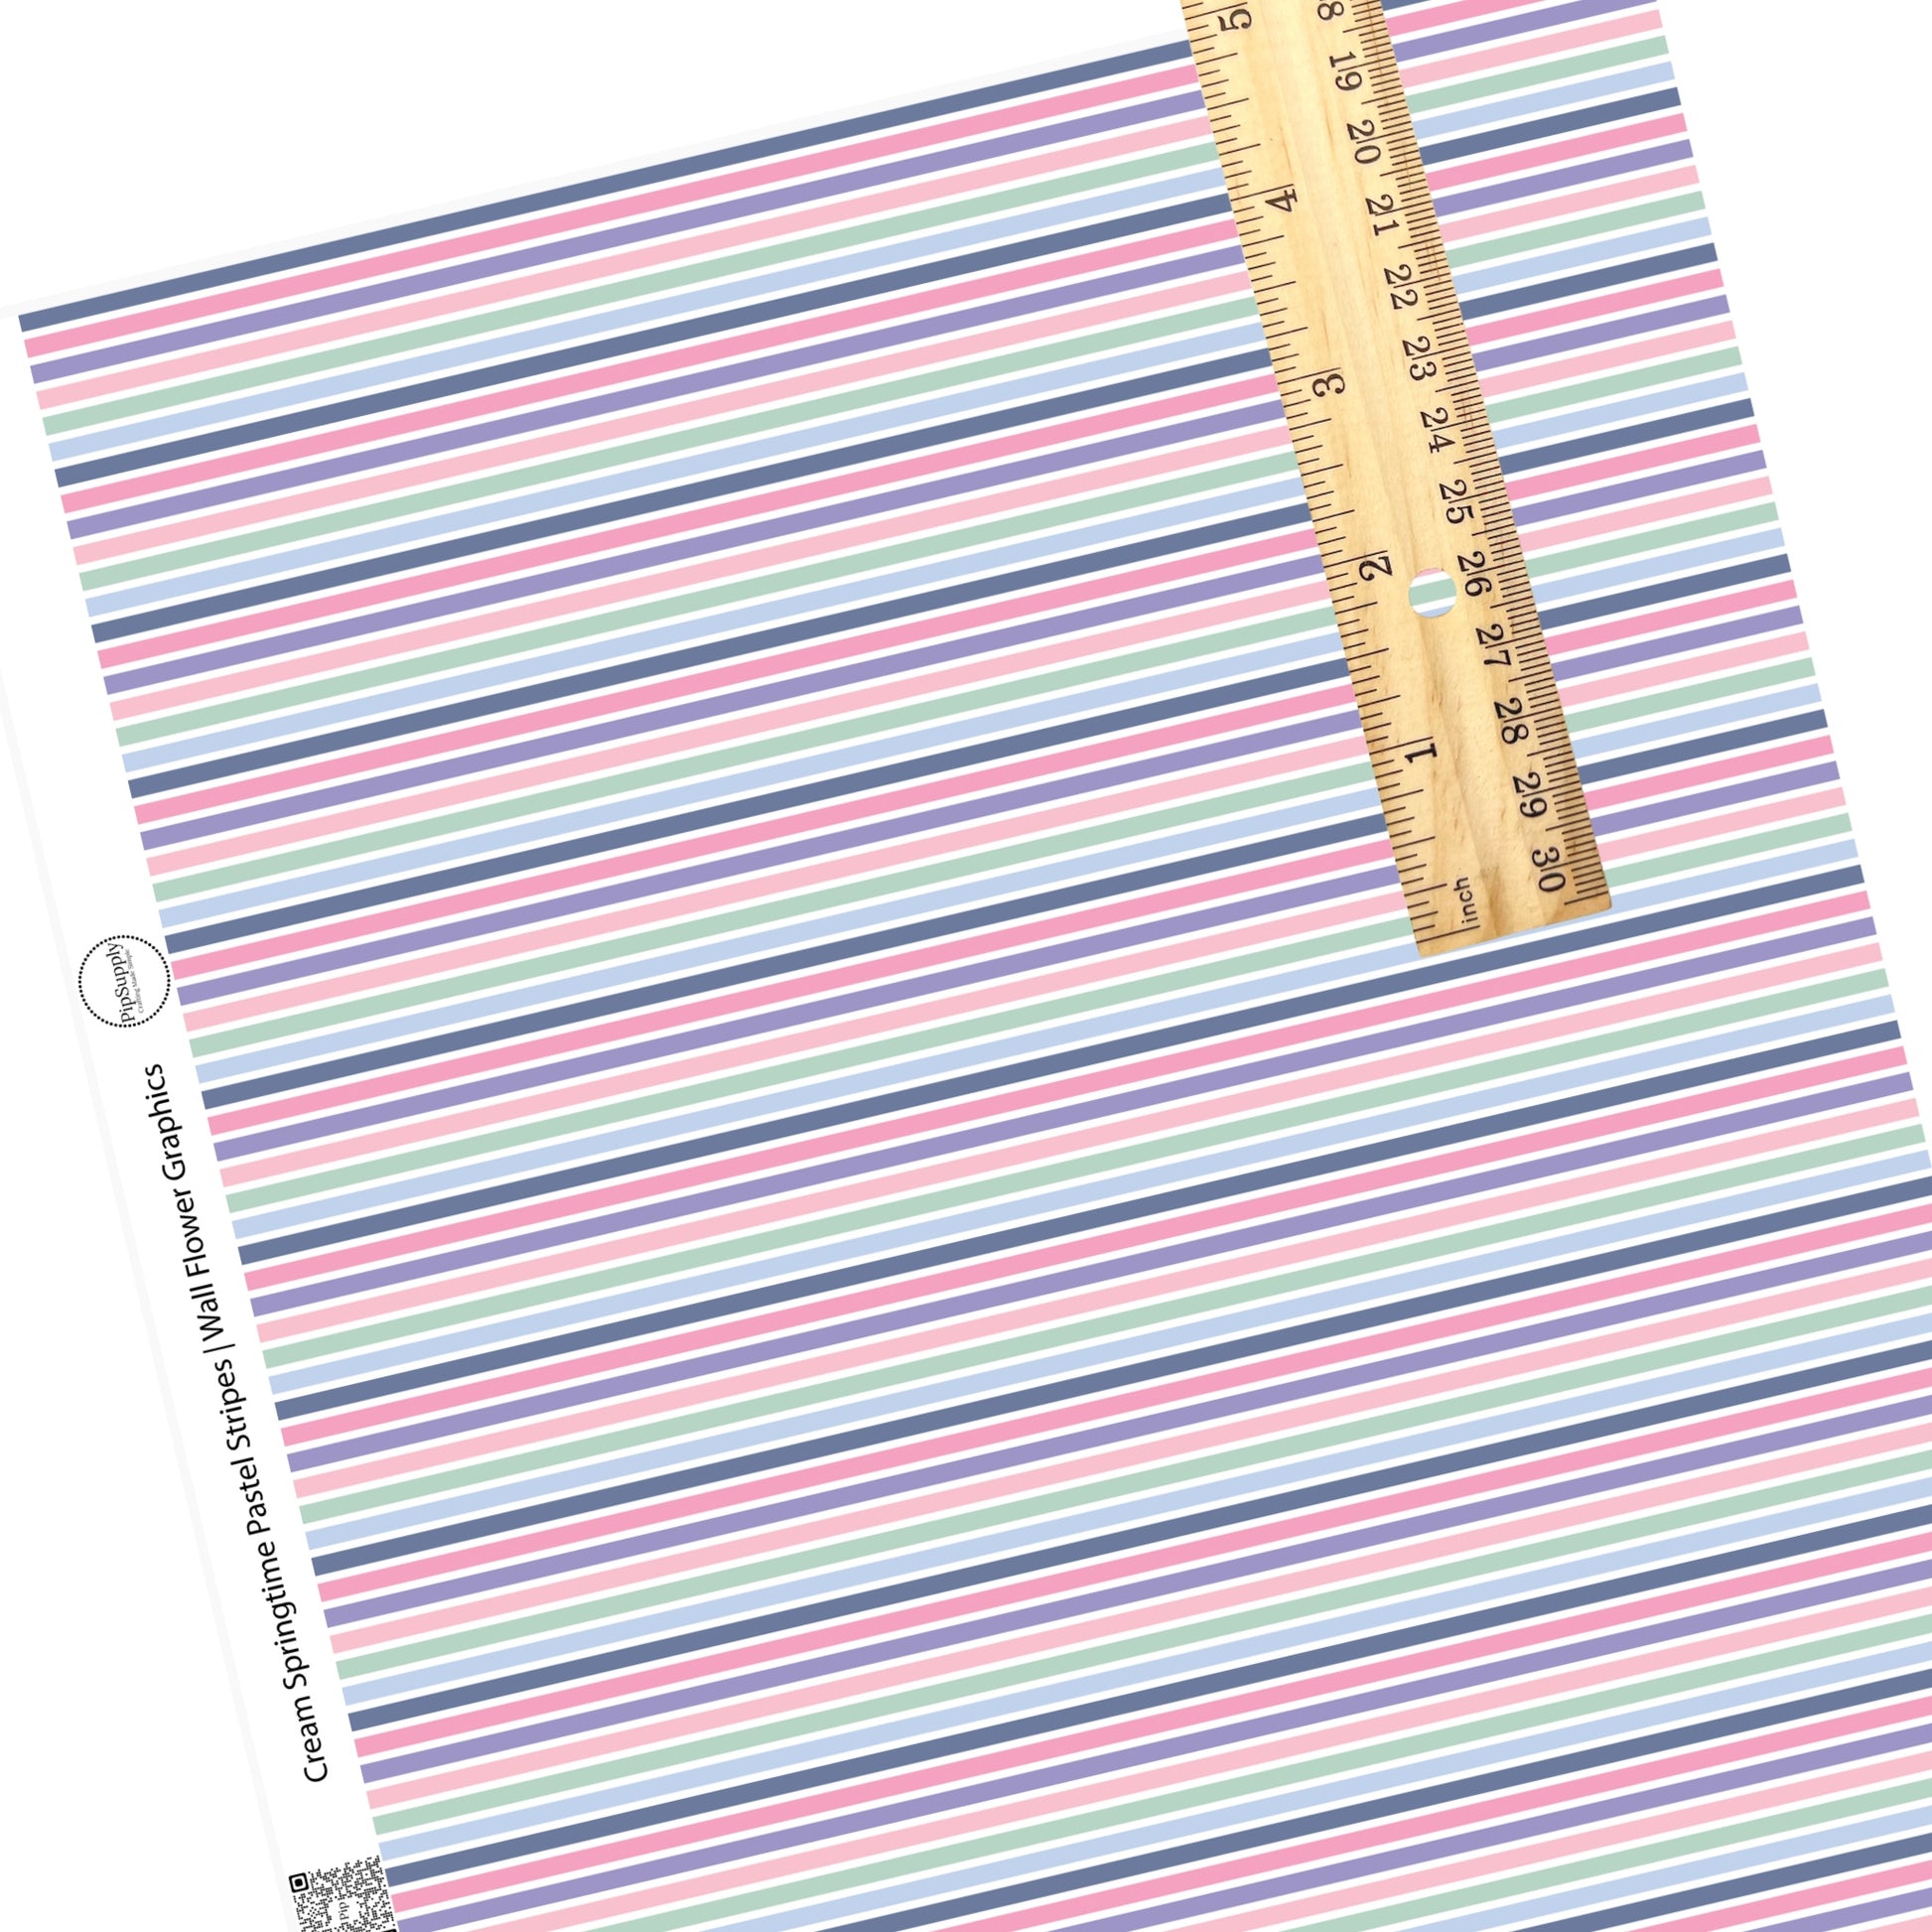 These spring stripe pattern themed faux leather sheets contain the following design elements: pastel pink, purple, green, and blue stripes. Our CPSIA compliant faux leather sheets or rolls can be used for all types of crafting projects.